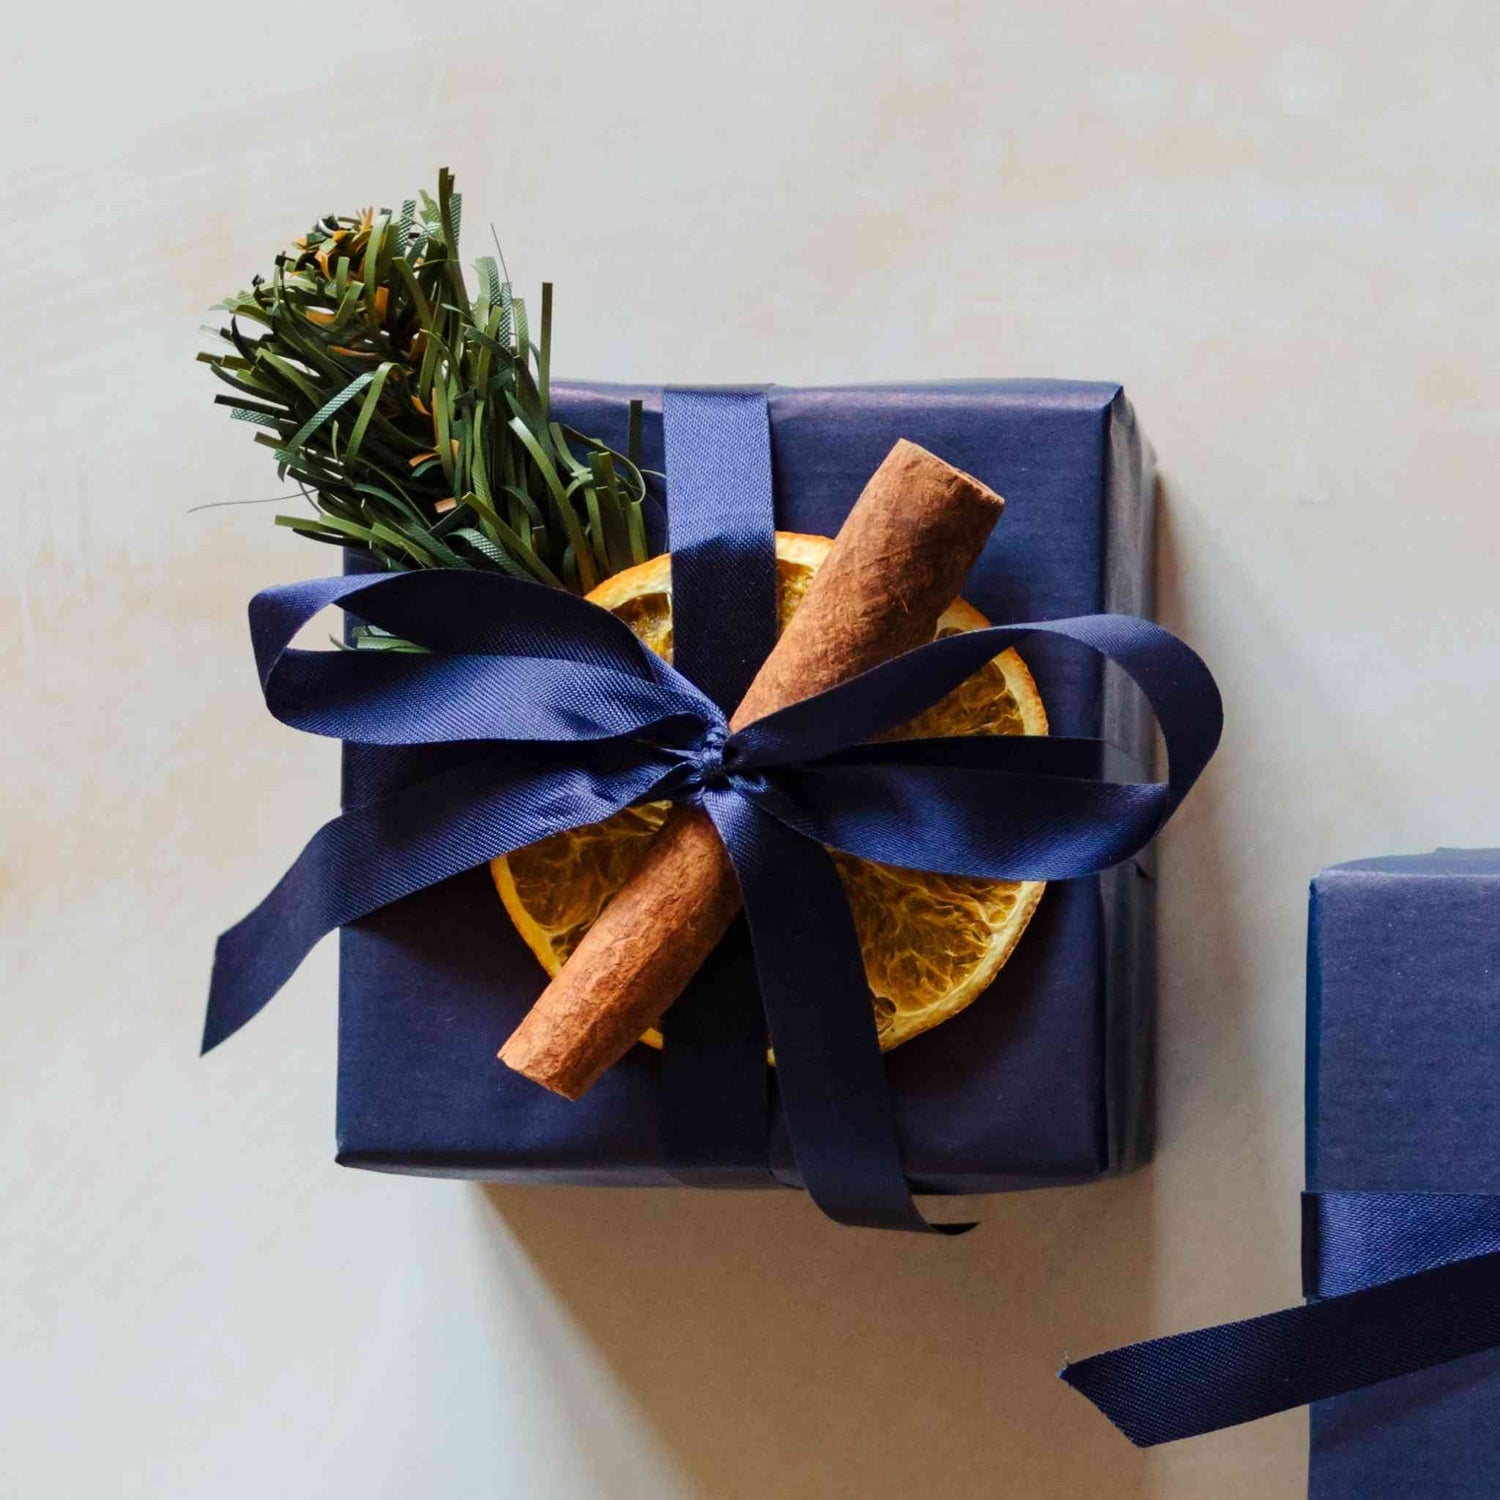 A 200g floral scented soy candle from the Home County Co. is shown with luxury Christmas Gift Wrap. The candle is wrapped in luxury navy wrapping paper secured with navy ribbon and Christmas embellishments.